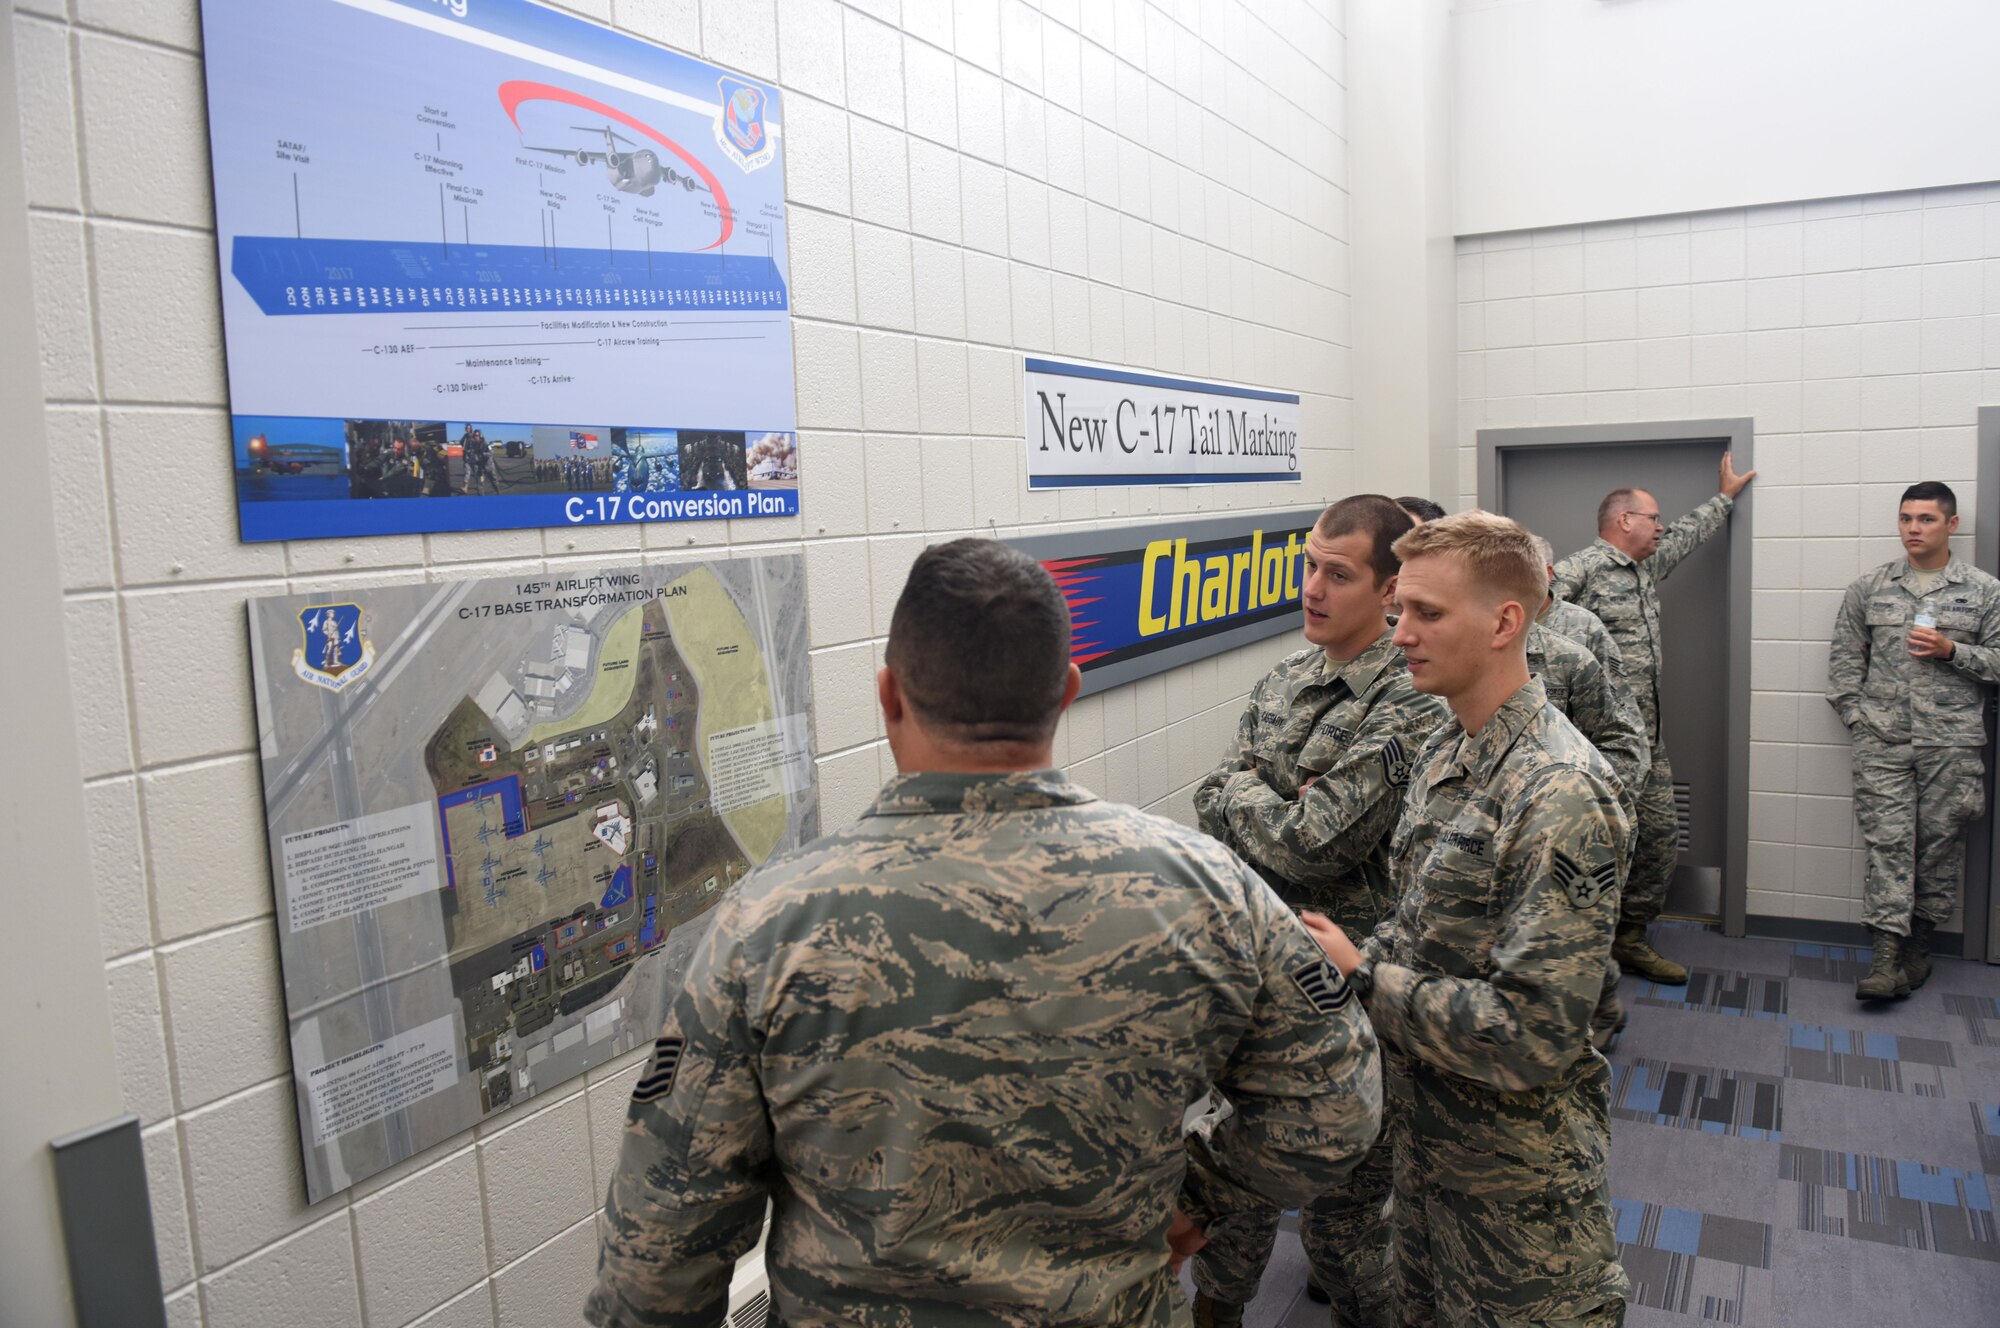 Members of the North Carolina Air National Guard (NCANG) browse the information boards and review the newly unveiled C-17 Globemaster III aircraft tail flash in the dining facility at the NCANG Base, Charlotte Douglas International Airport, May 6, 2017. The tail flash is an integral part of establishing the brand of the NCANG. Every detail from the colors, to the length of the sabre, and the bold print symbolize the importance of new mission that will be carried out by the airmen and C-17 Globemaster III aircraft. (U.S. Air National Guard photo by Staff. Sgt. Laura J. Montgomery)